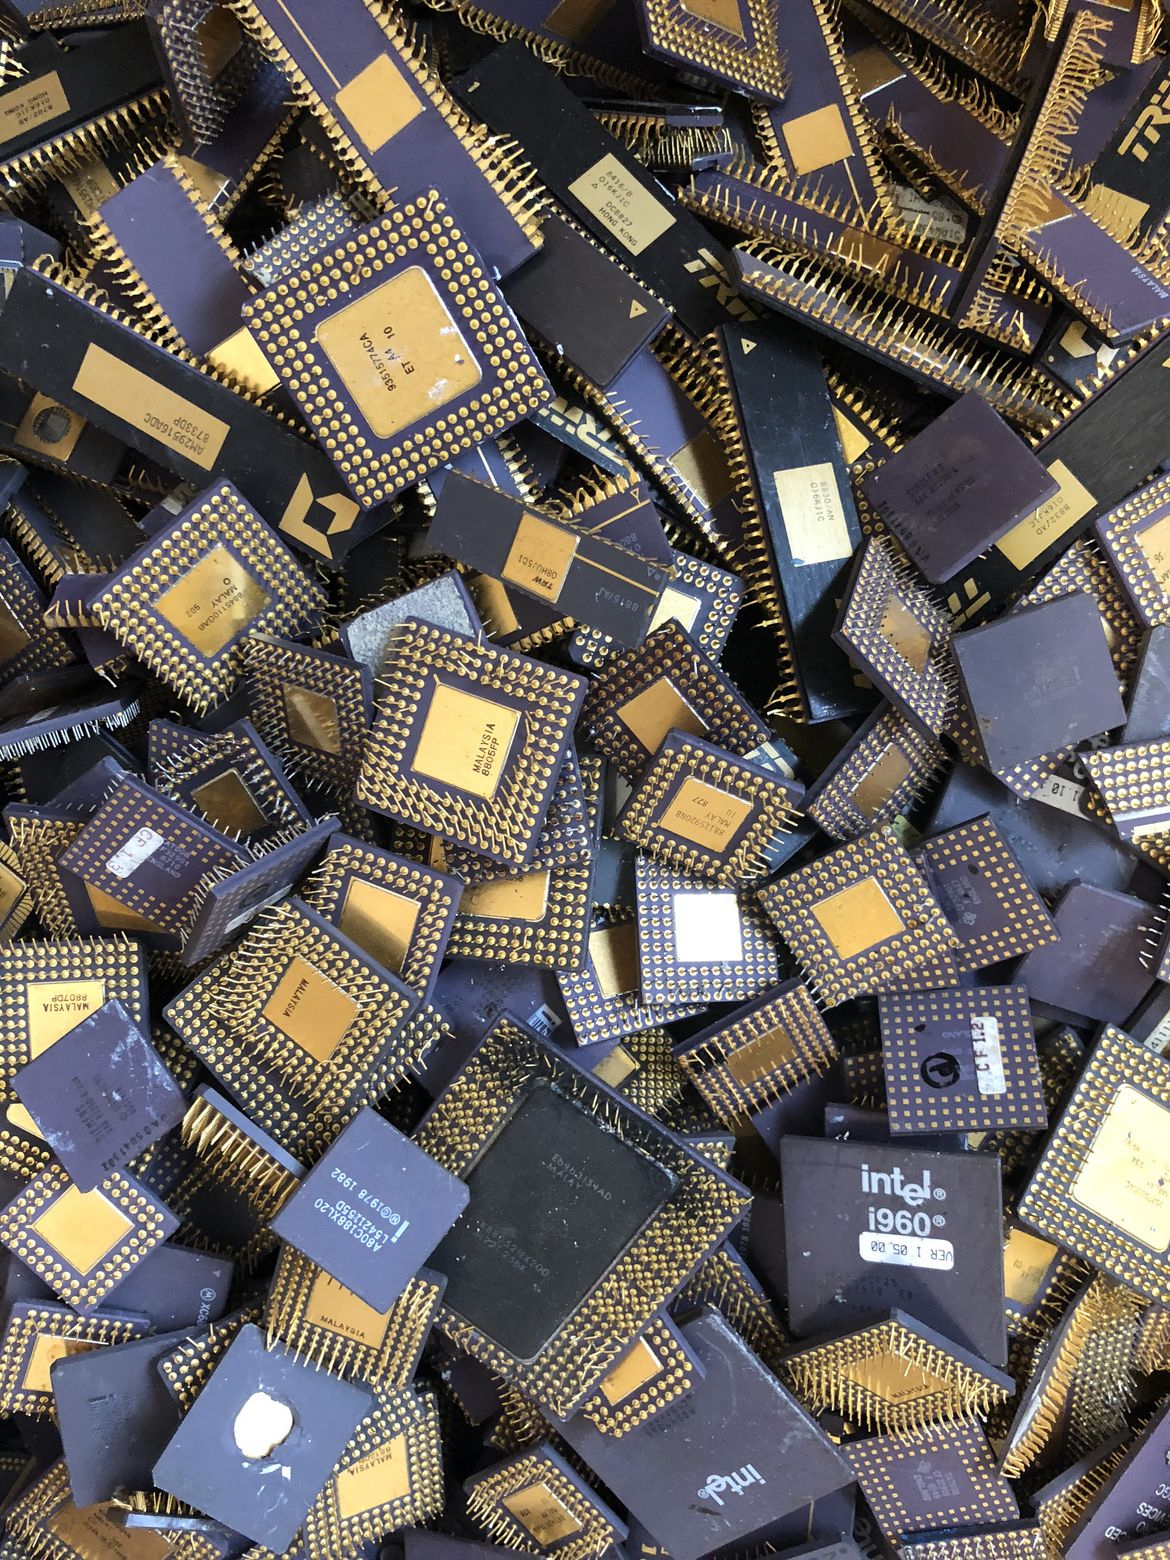 Computer chips / processors